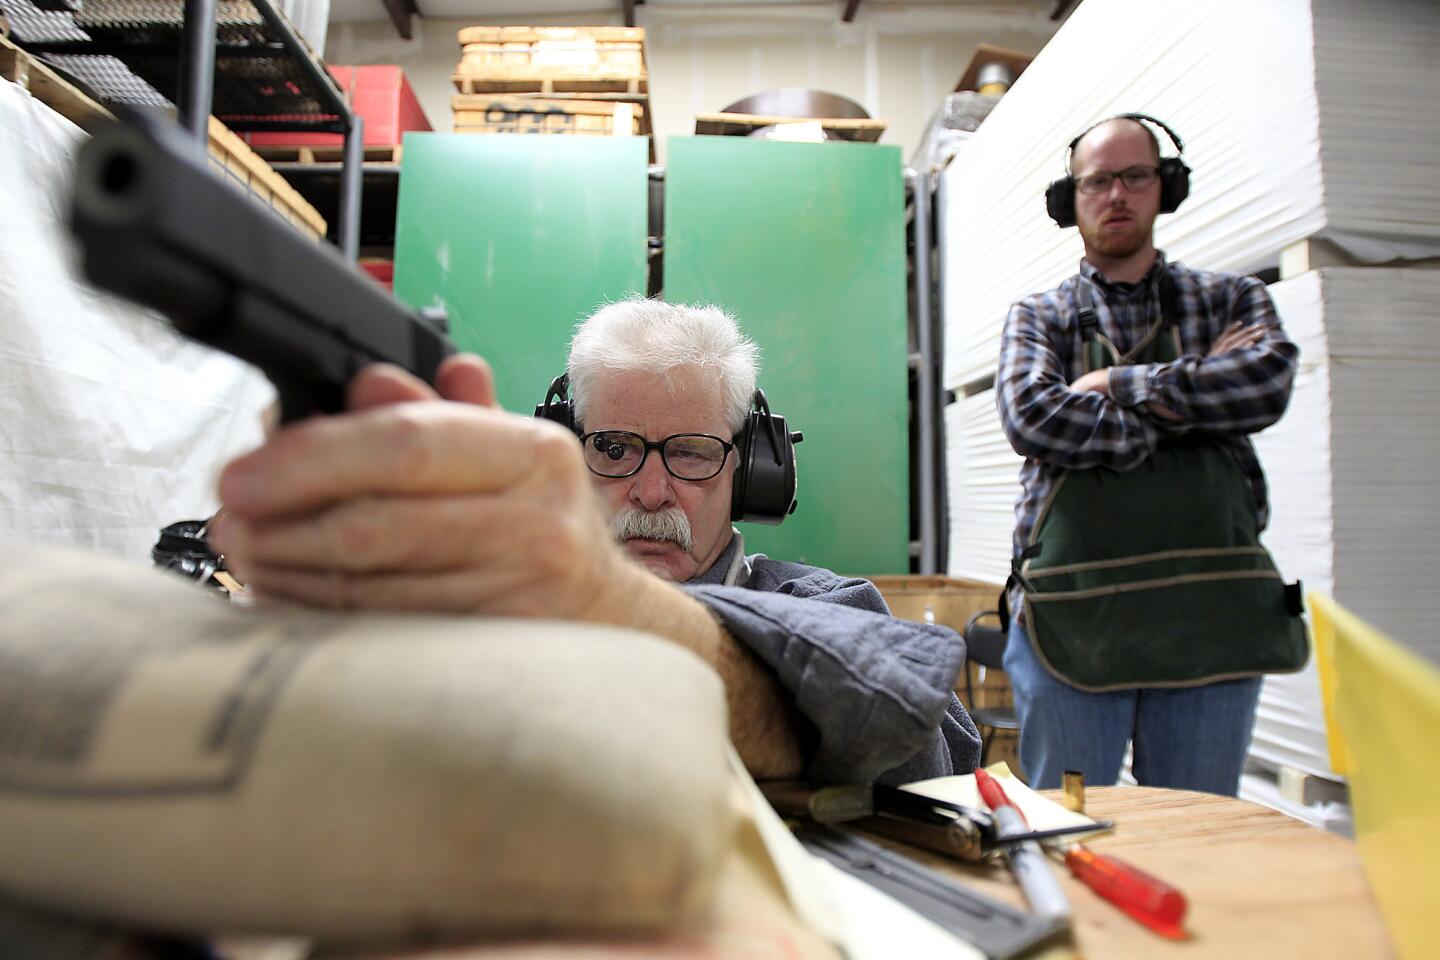 Gunsmith Terry Tussey, left, takes aim on a target before test-firing a 1911 Colt pistol as apprentice Kevin Smith looks on. Tussey test-fires all of the guns he repairs at his shop in Carson City, Nev.